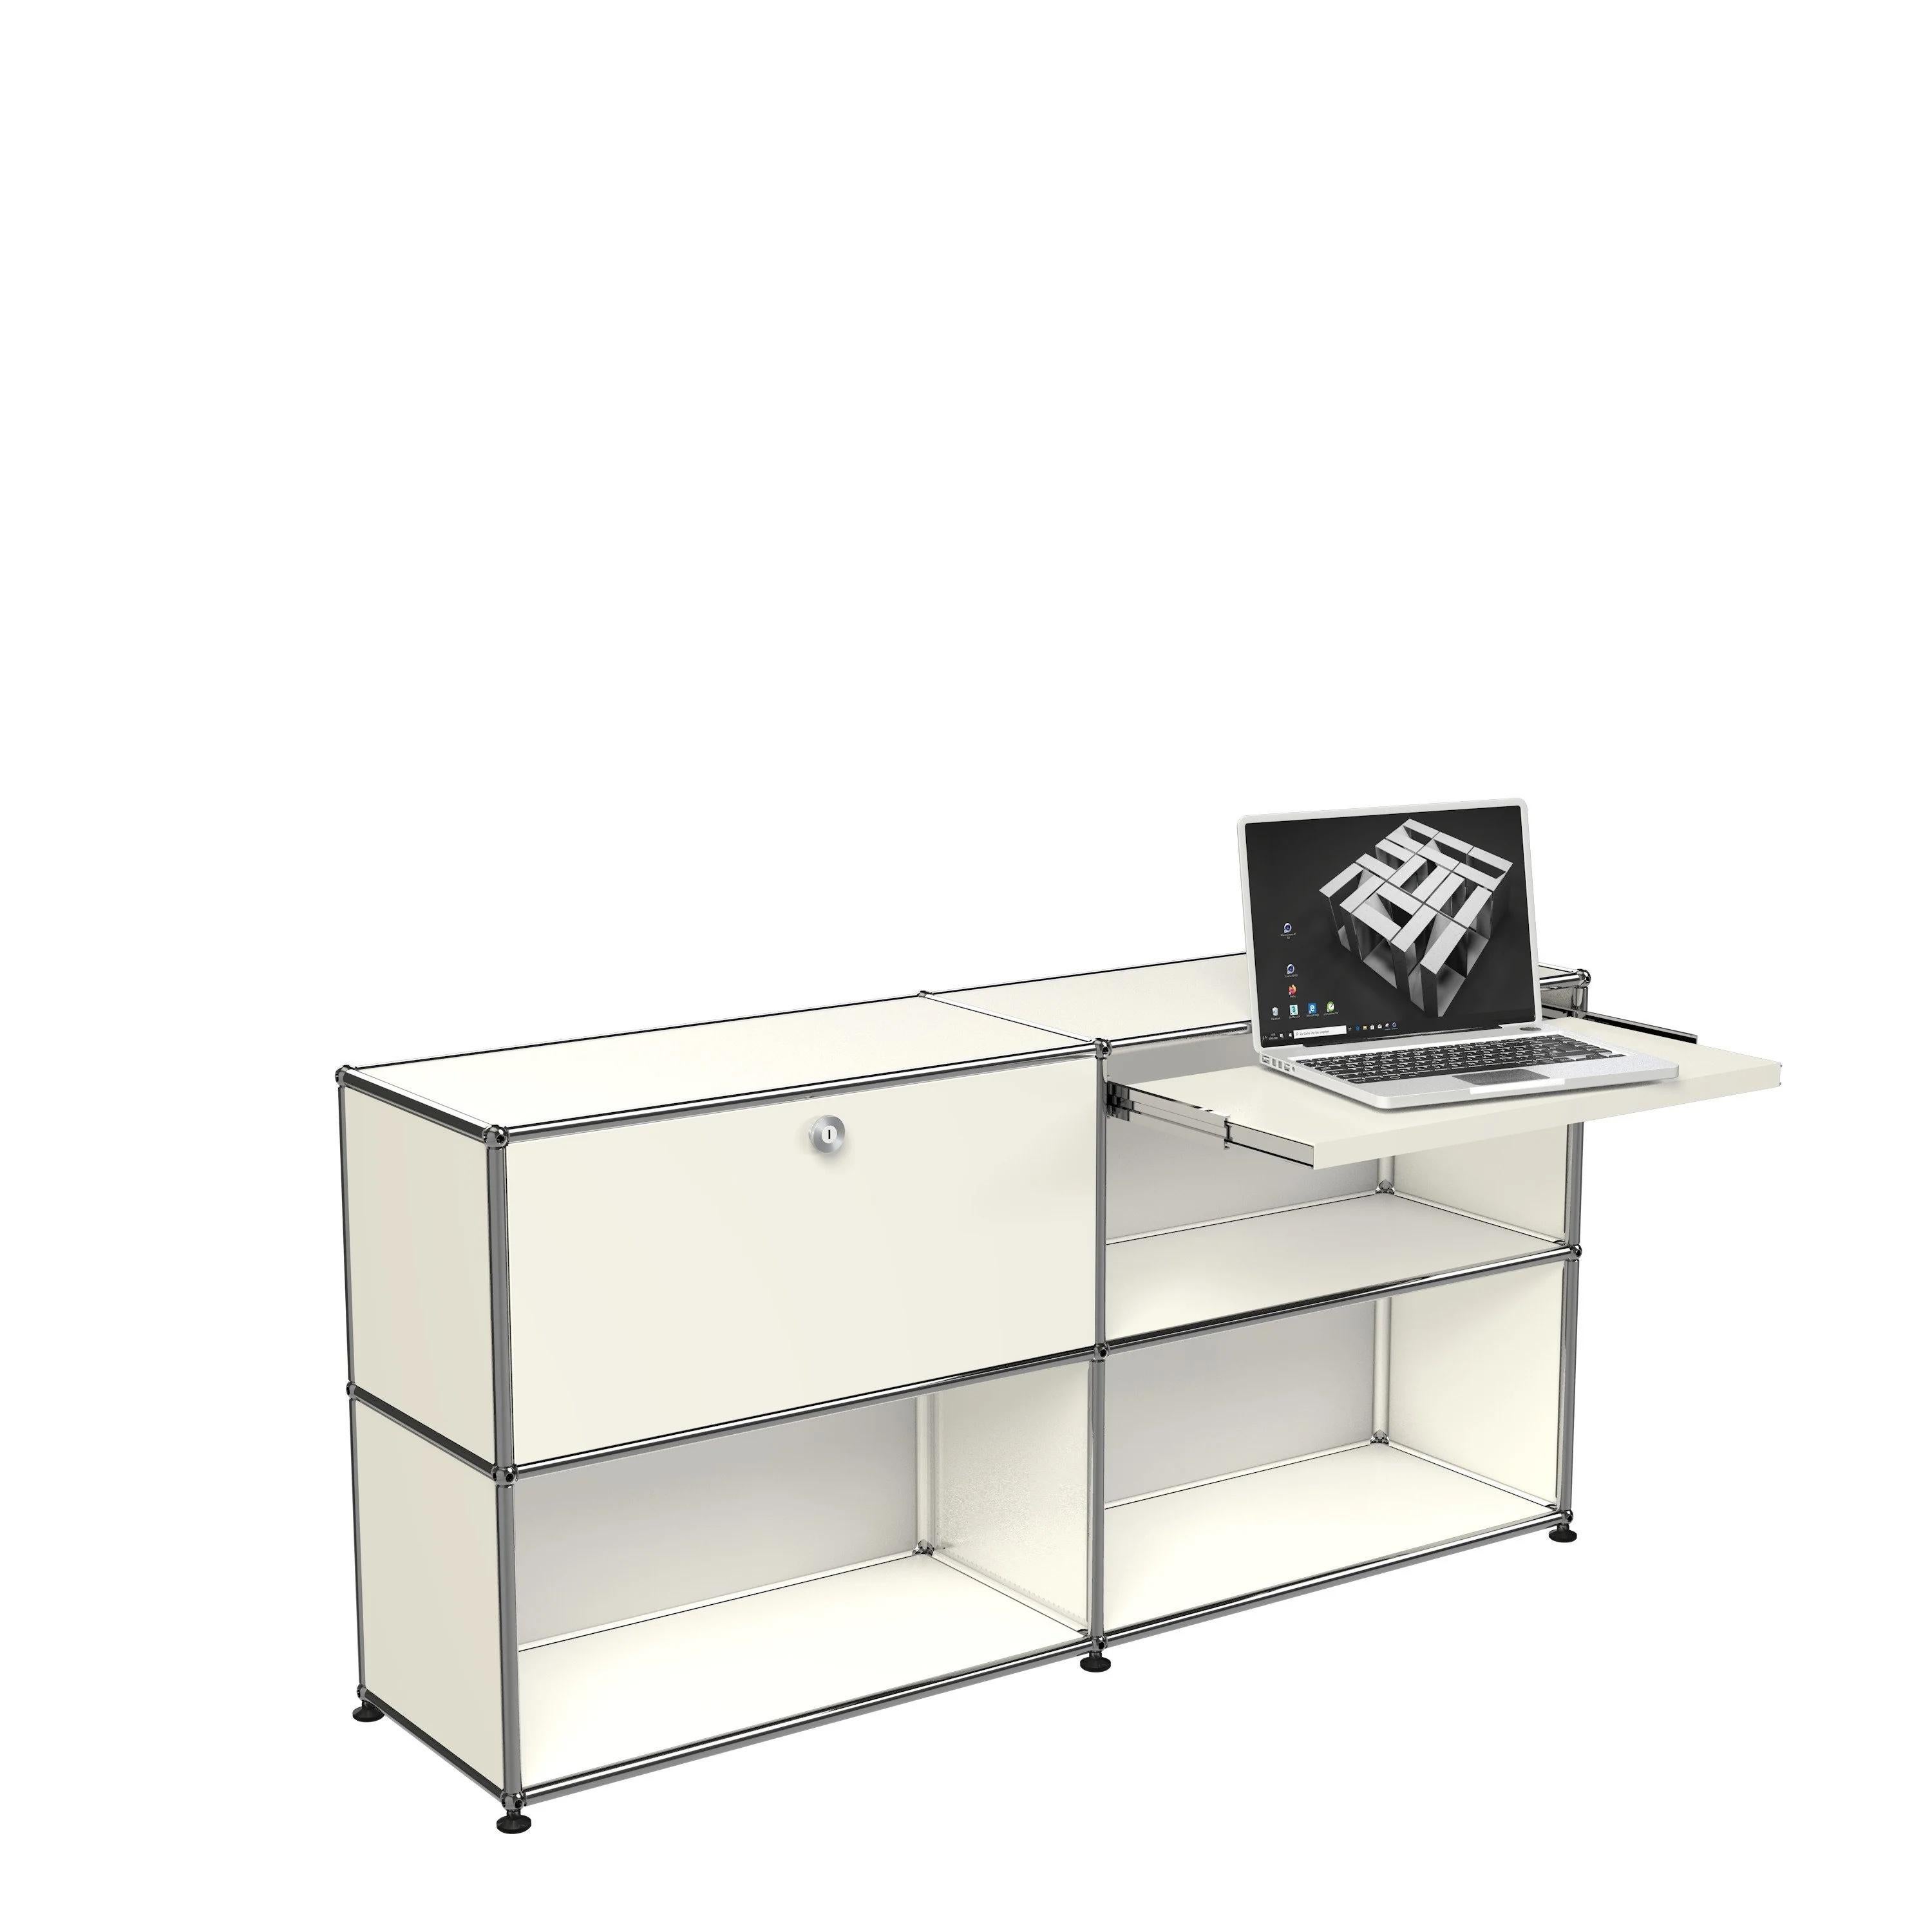 A Customizable desk unit designed to your specifications. Available in 14 standard surface colors.
Dimensions
H 30in / 76.2cm
W 60in / 152.4cm
D 15in / 39.1cm

Weight
41.9 kgs / 92.3 lbs
Materials

Powder-coated steel panels. Chromed steel